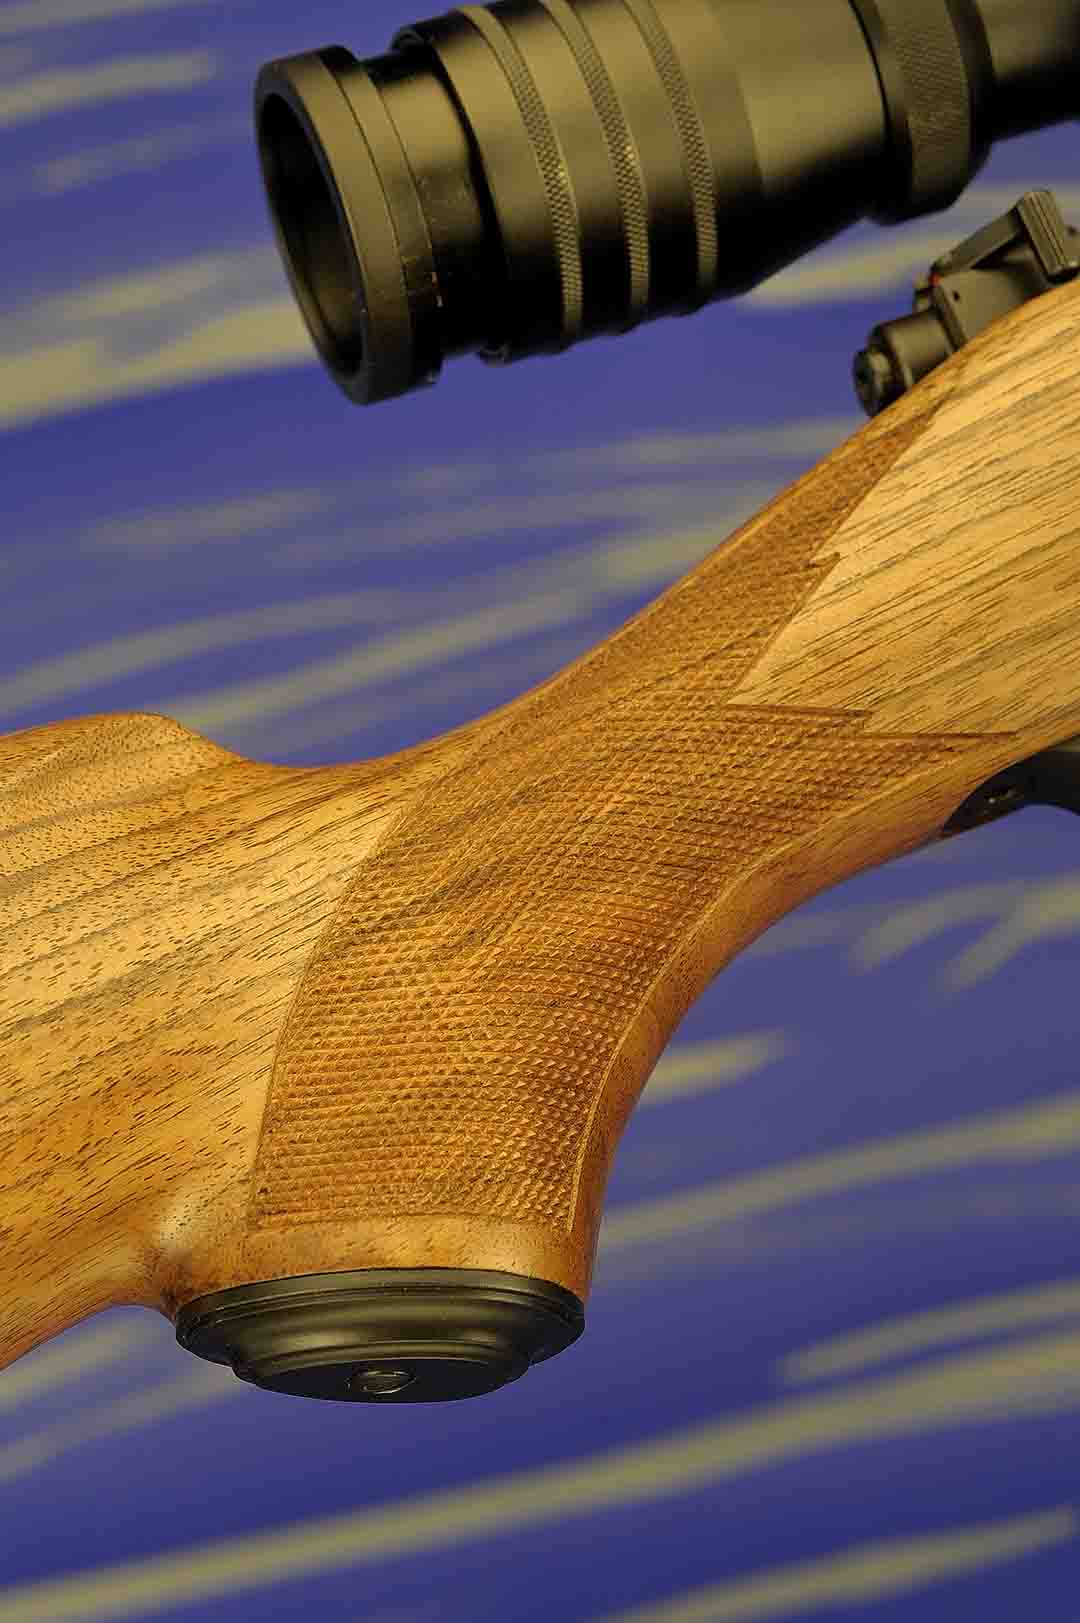 Fine line checking in a 20 lines-per-inch point pattern is standard on the model. More than an adequate design has been applied to both the pistol grip and forearm of the rifle. The metal grip also complements this part of the rifle.